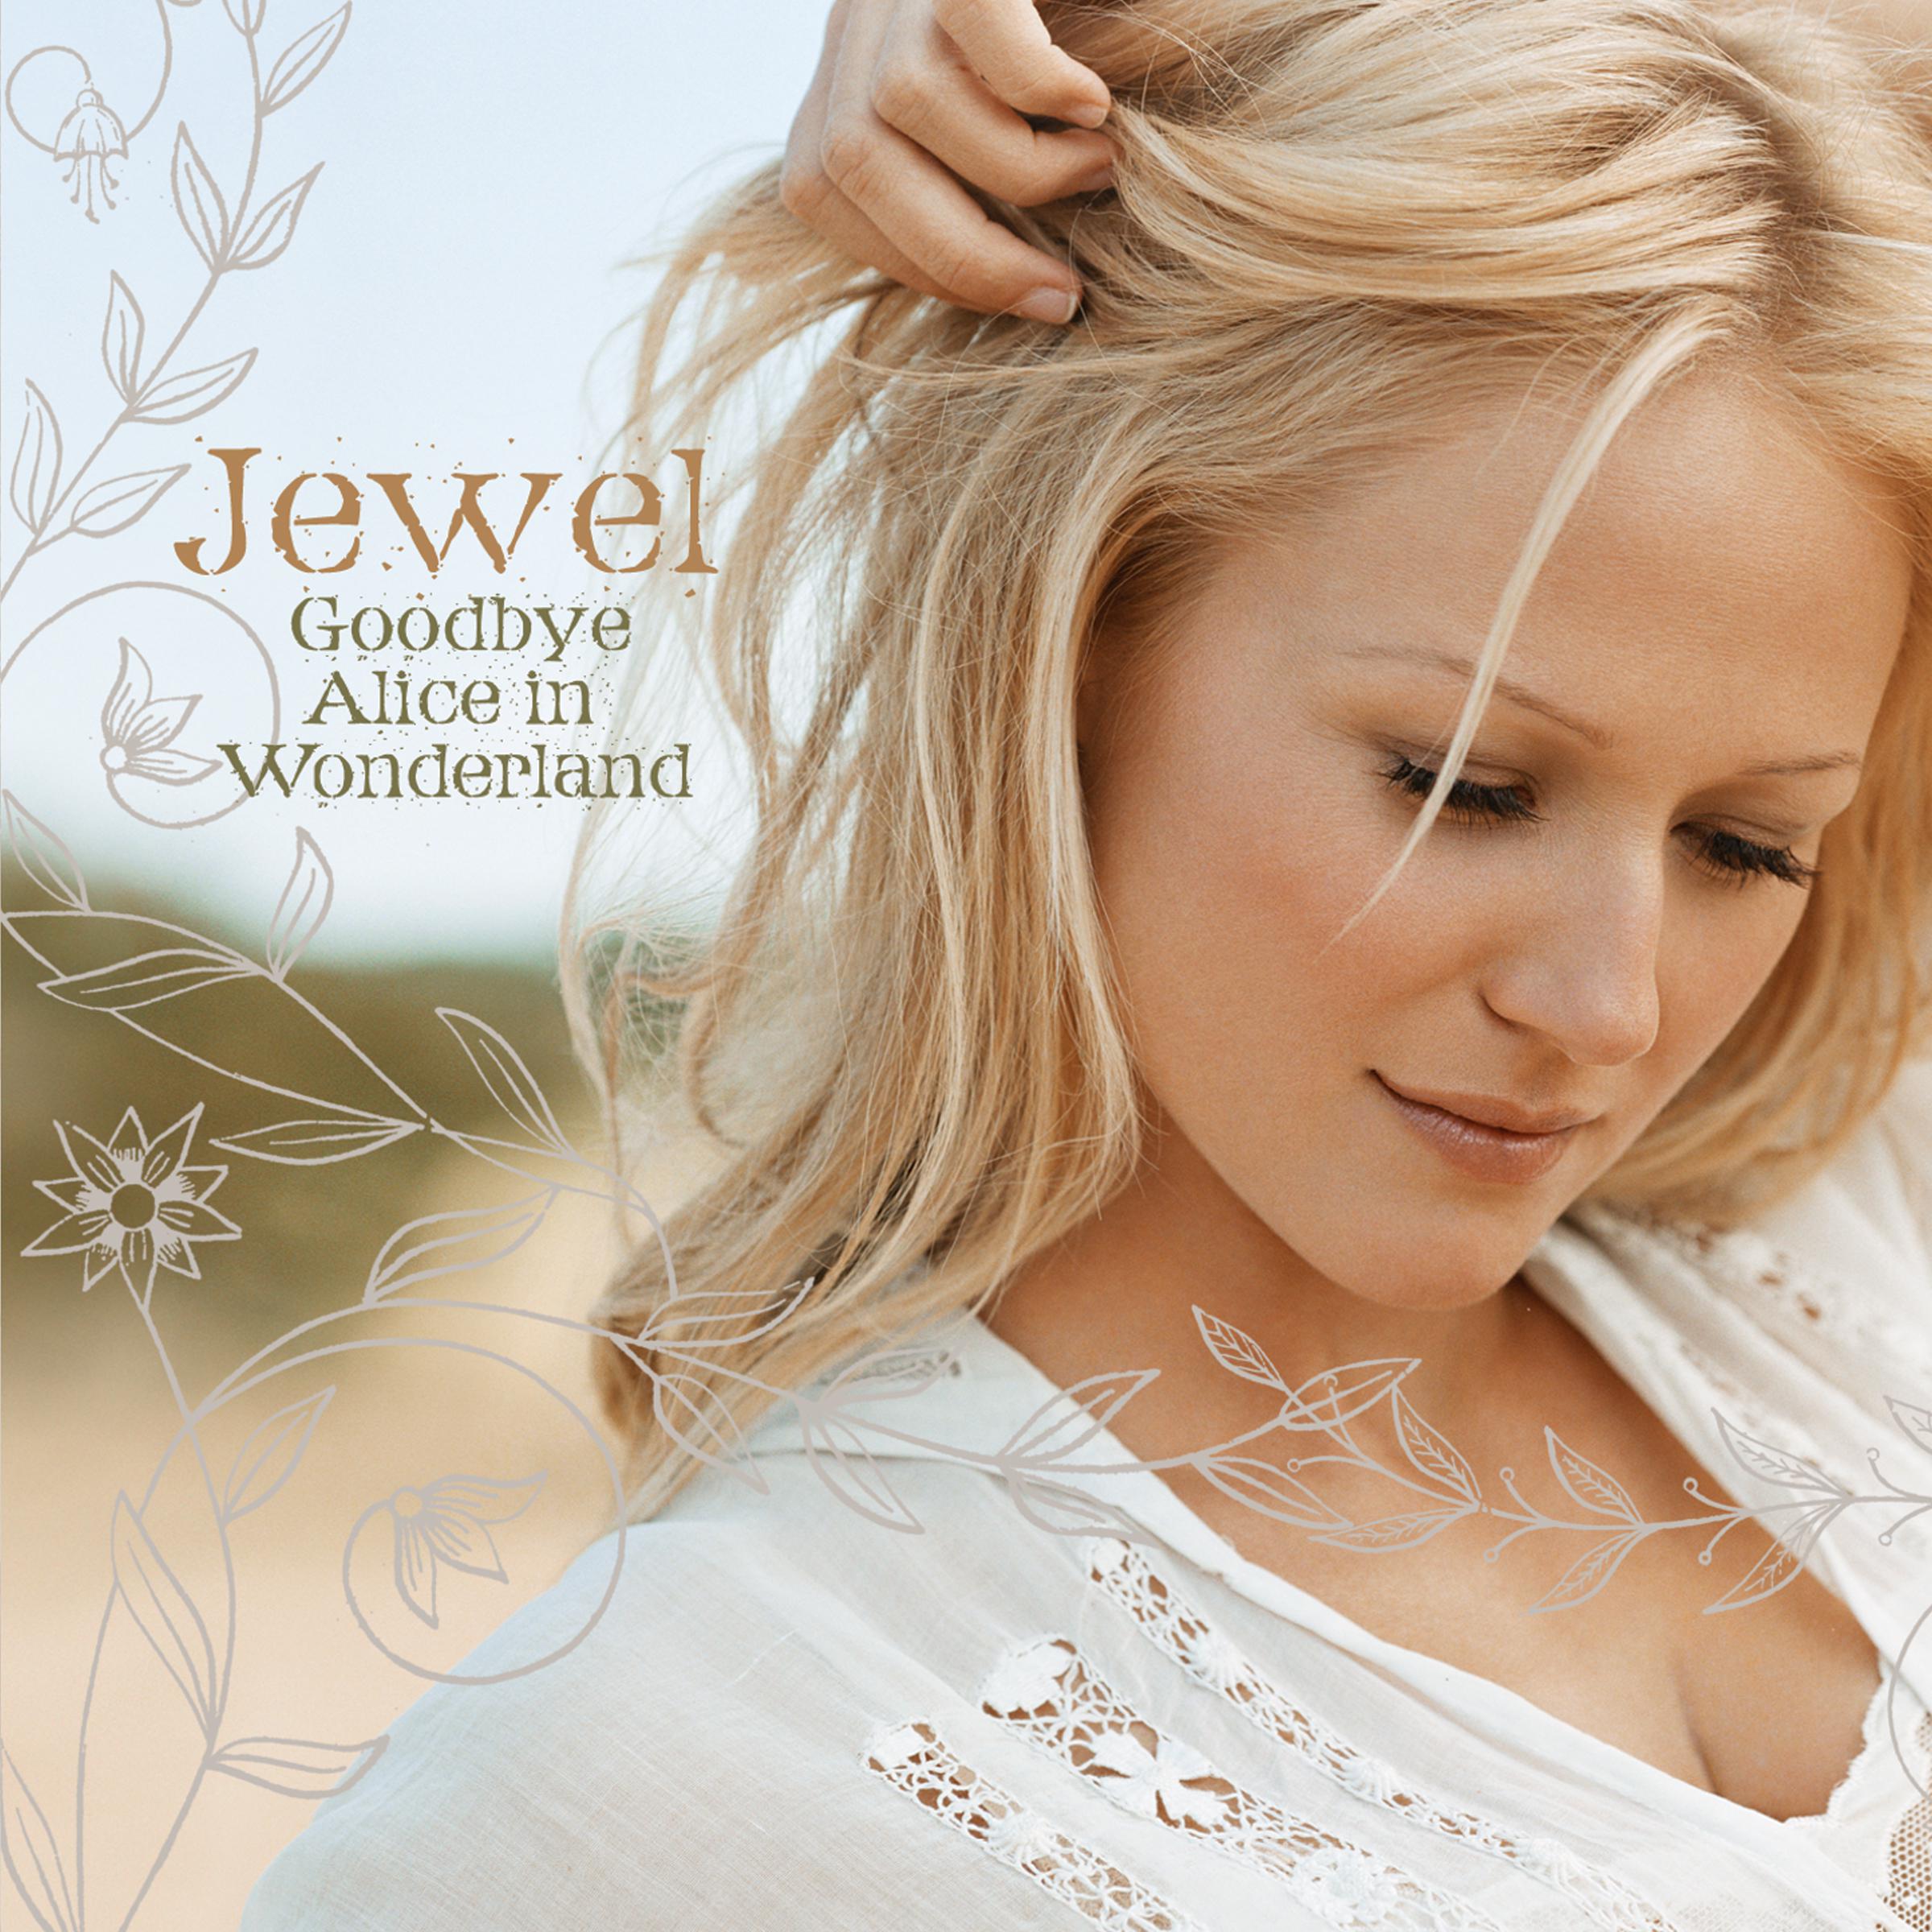 the jewel collection